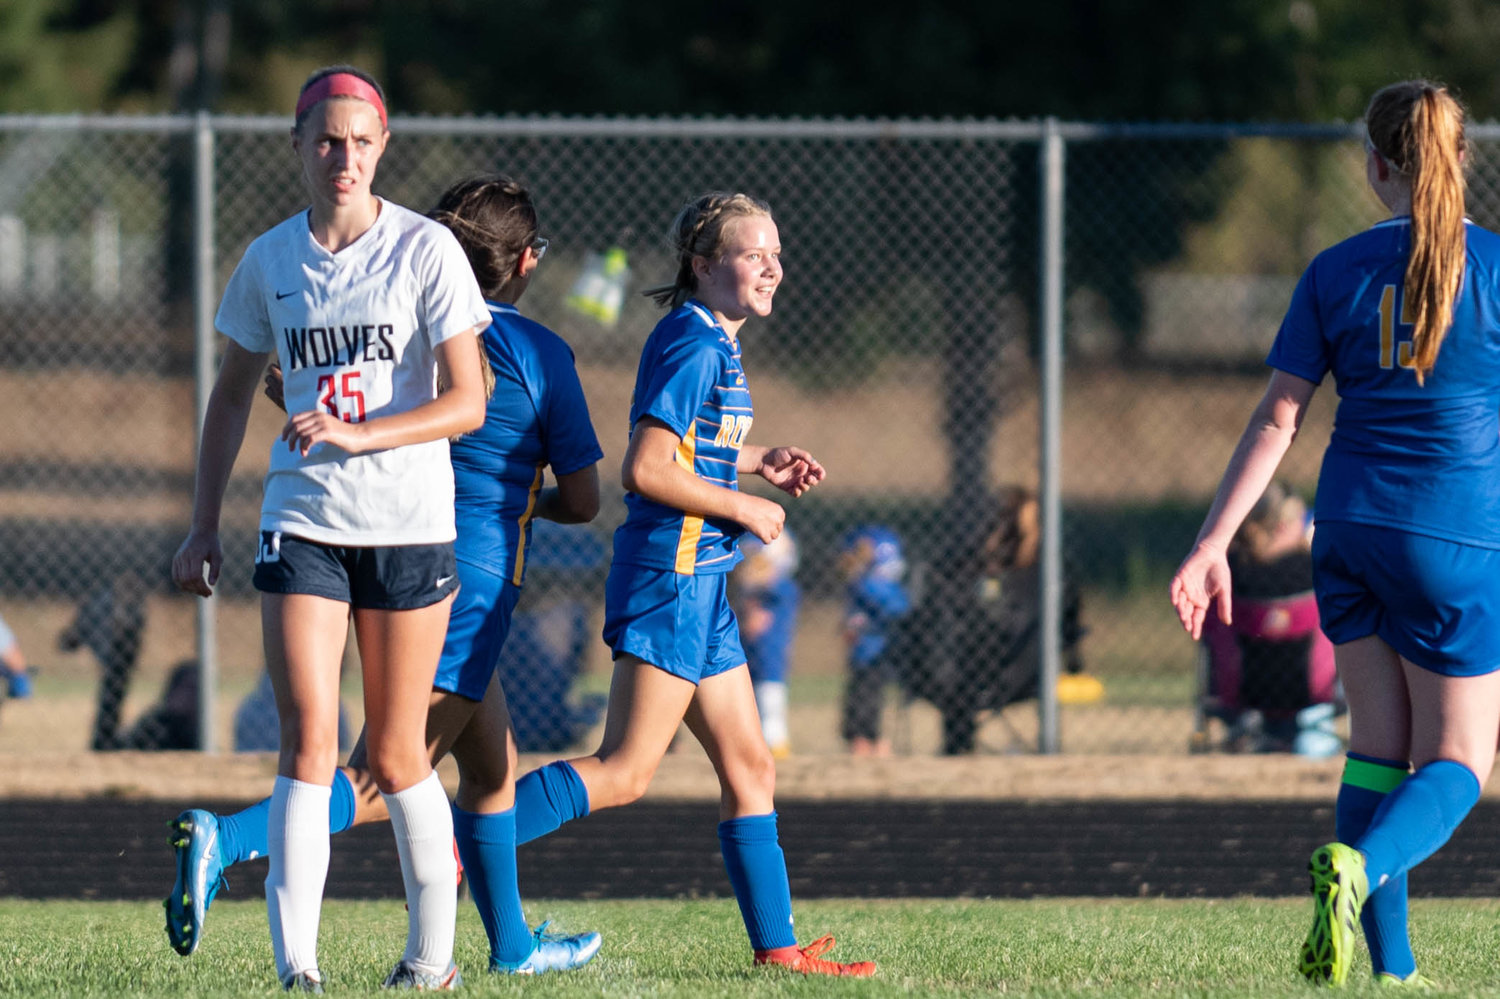 Freshmen midfielder Piper Quarnstrom smiles after scoring a goal for Rochester in its game against Black Hills Wednesday.